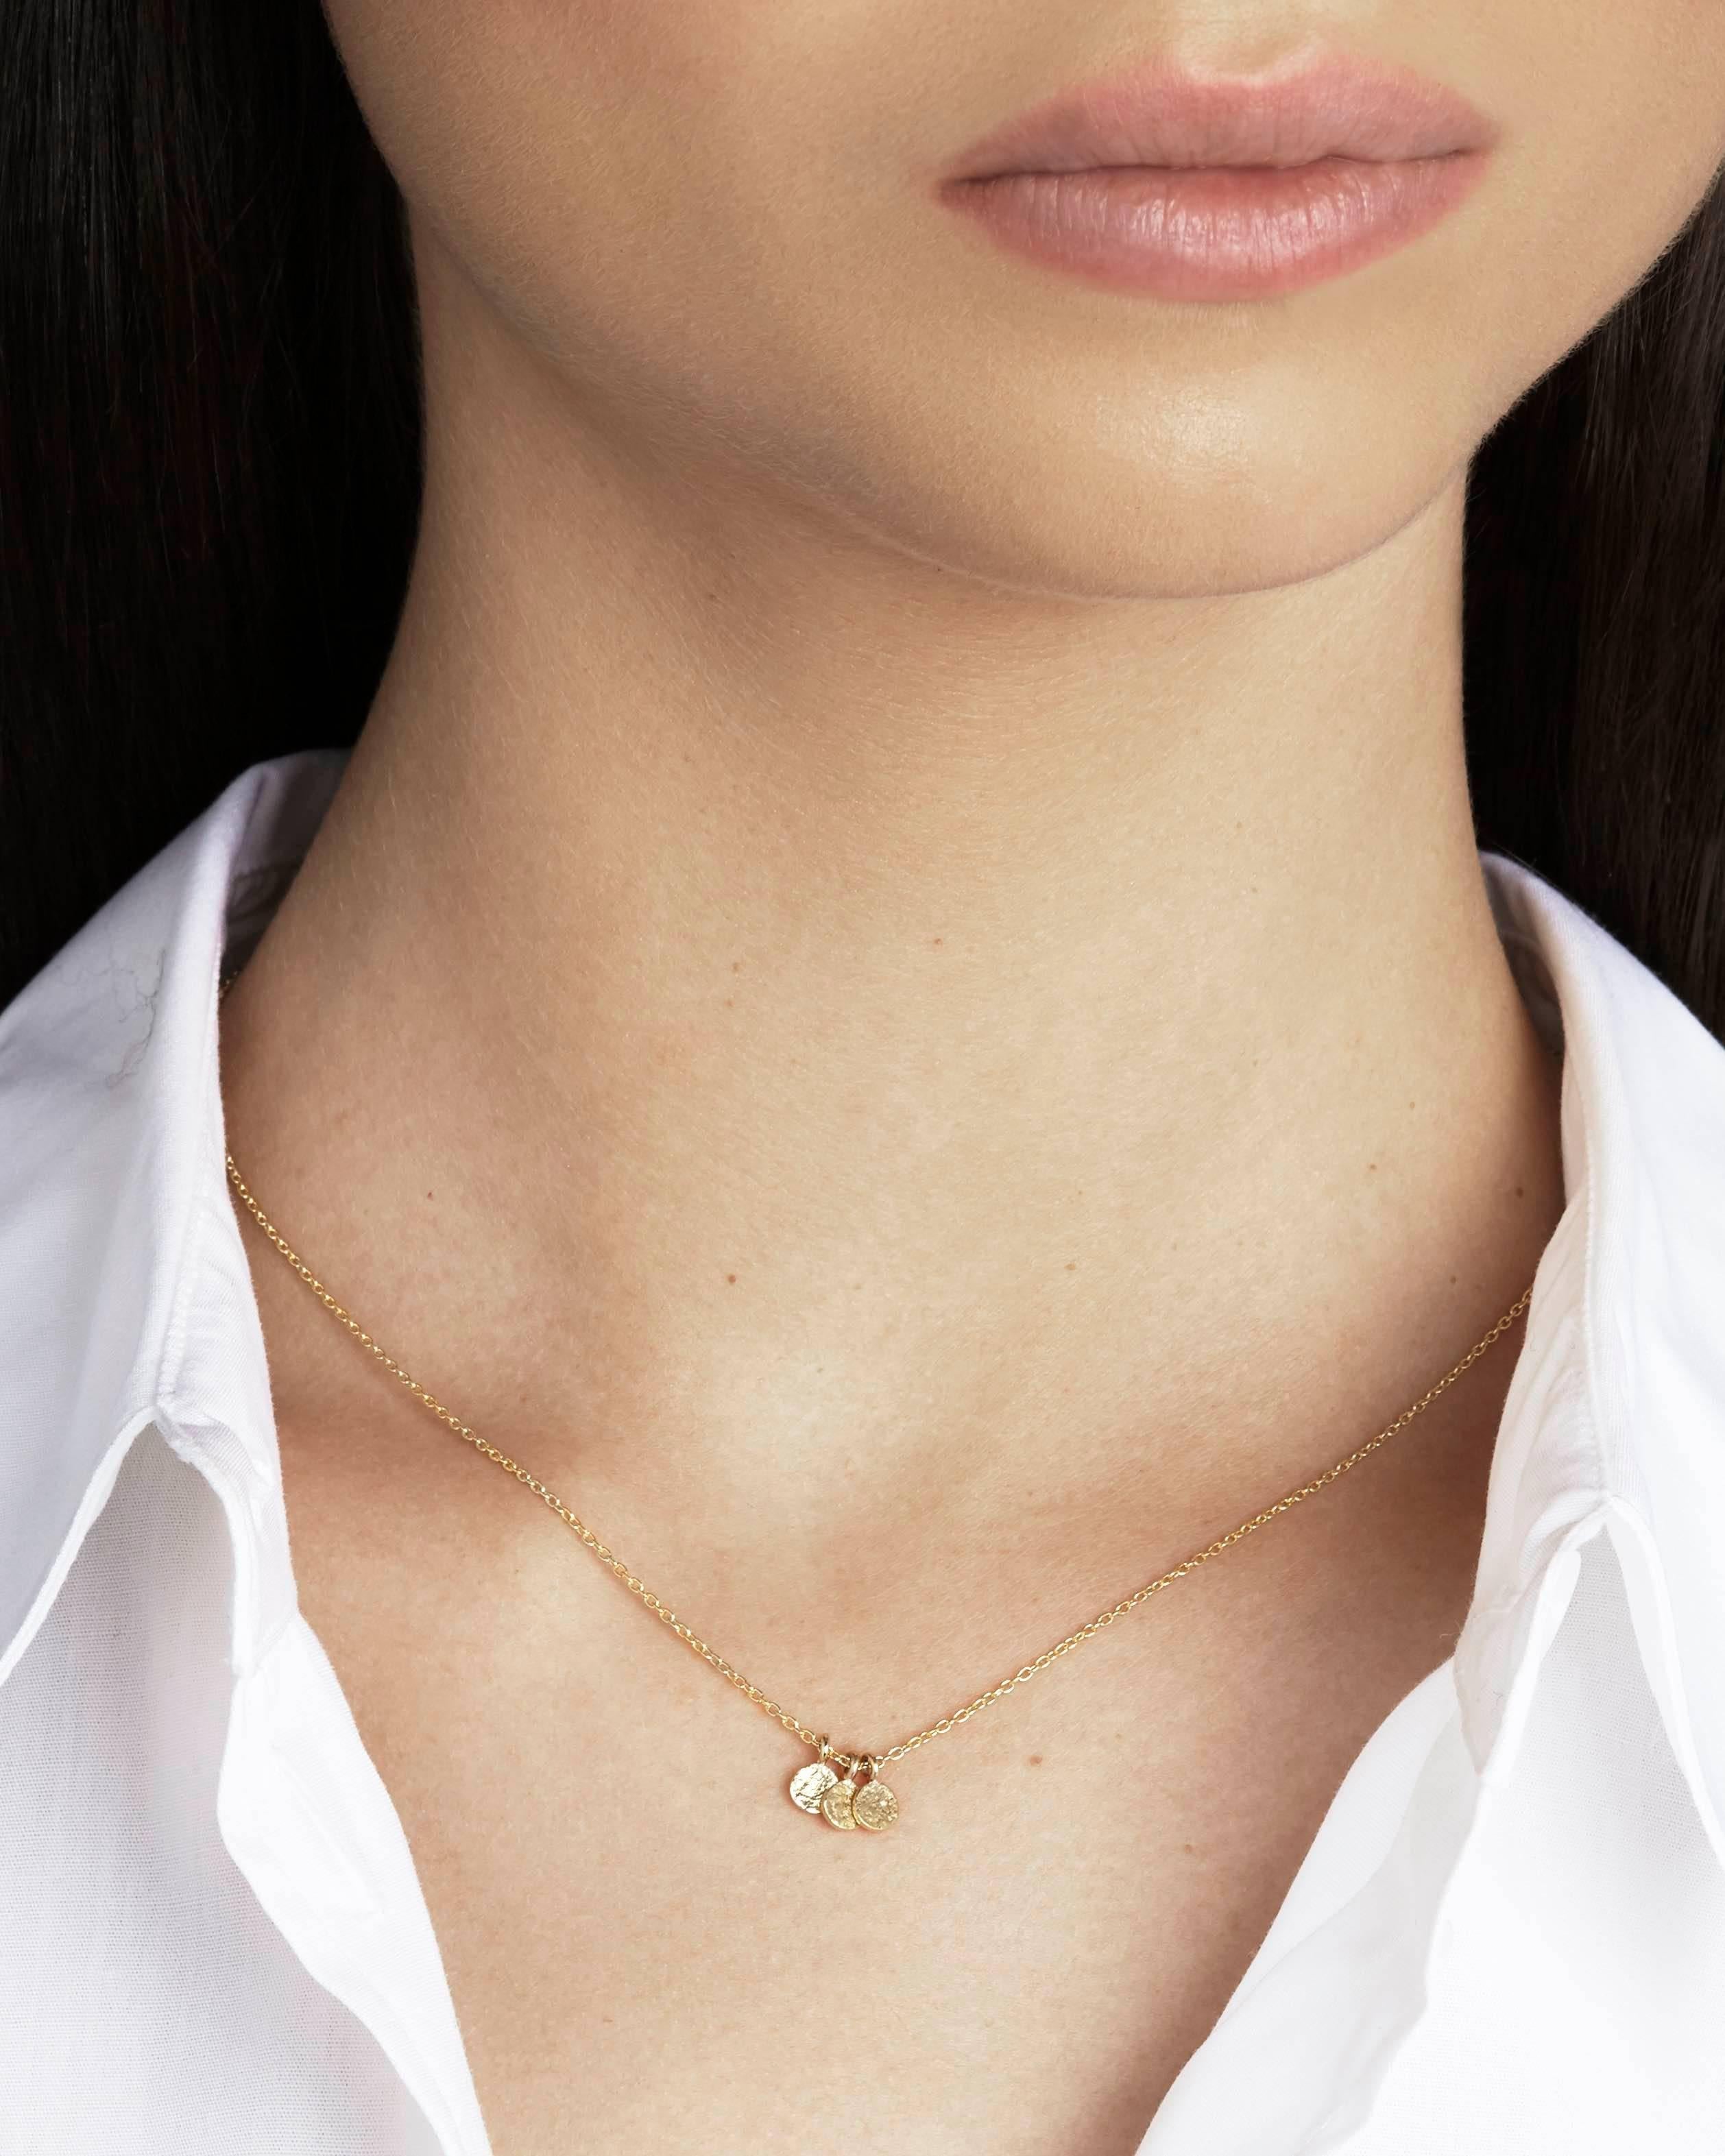 Featuring our signature Paper texture on three tiny disc pendants, the trio necklace is crafted in solid 18-carat yellow gold. The pendants are strung on a delicate 16-inch 18-carat gold chain.  The reverse of the pendants can be engraved with